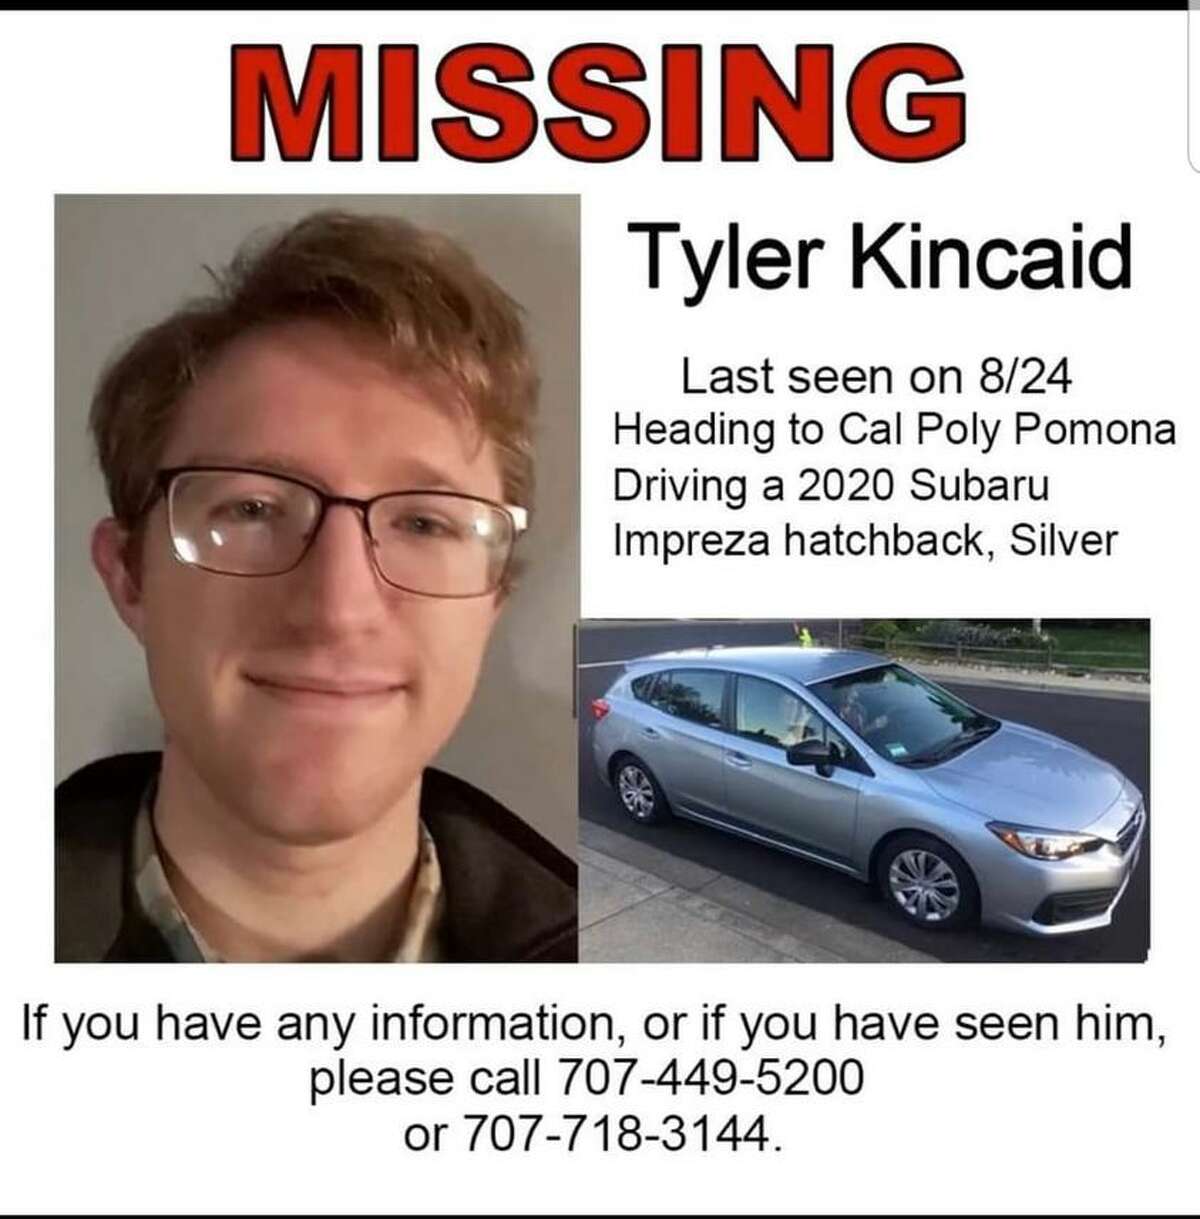 This poster shows information for the missing student, Tyler Kincaid.